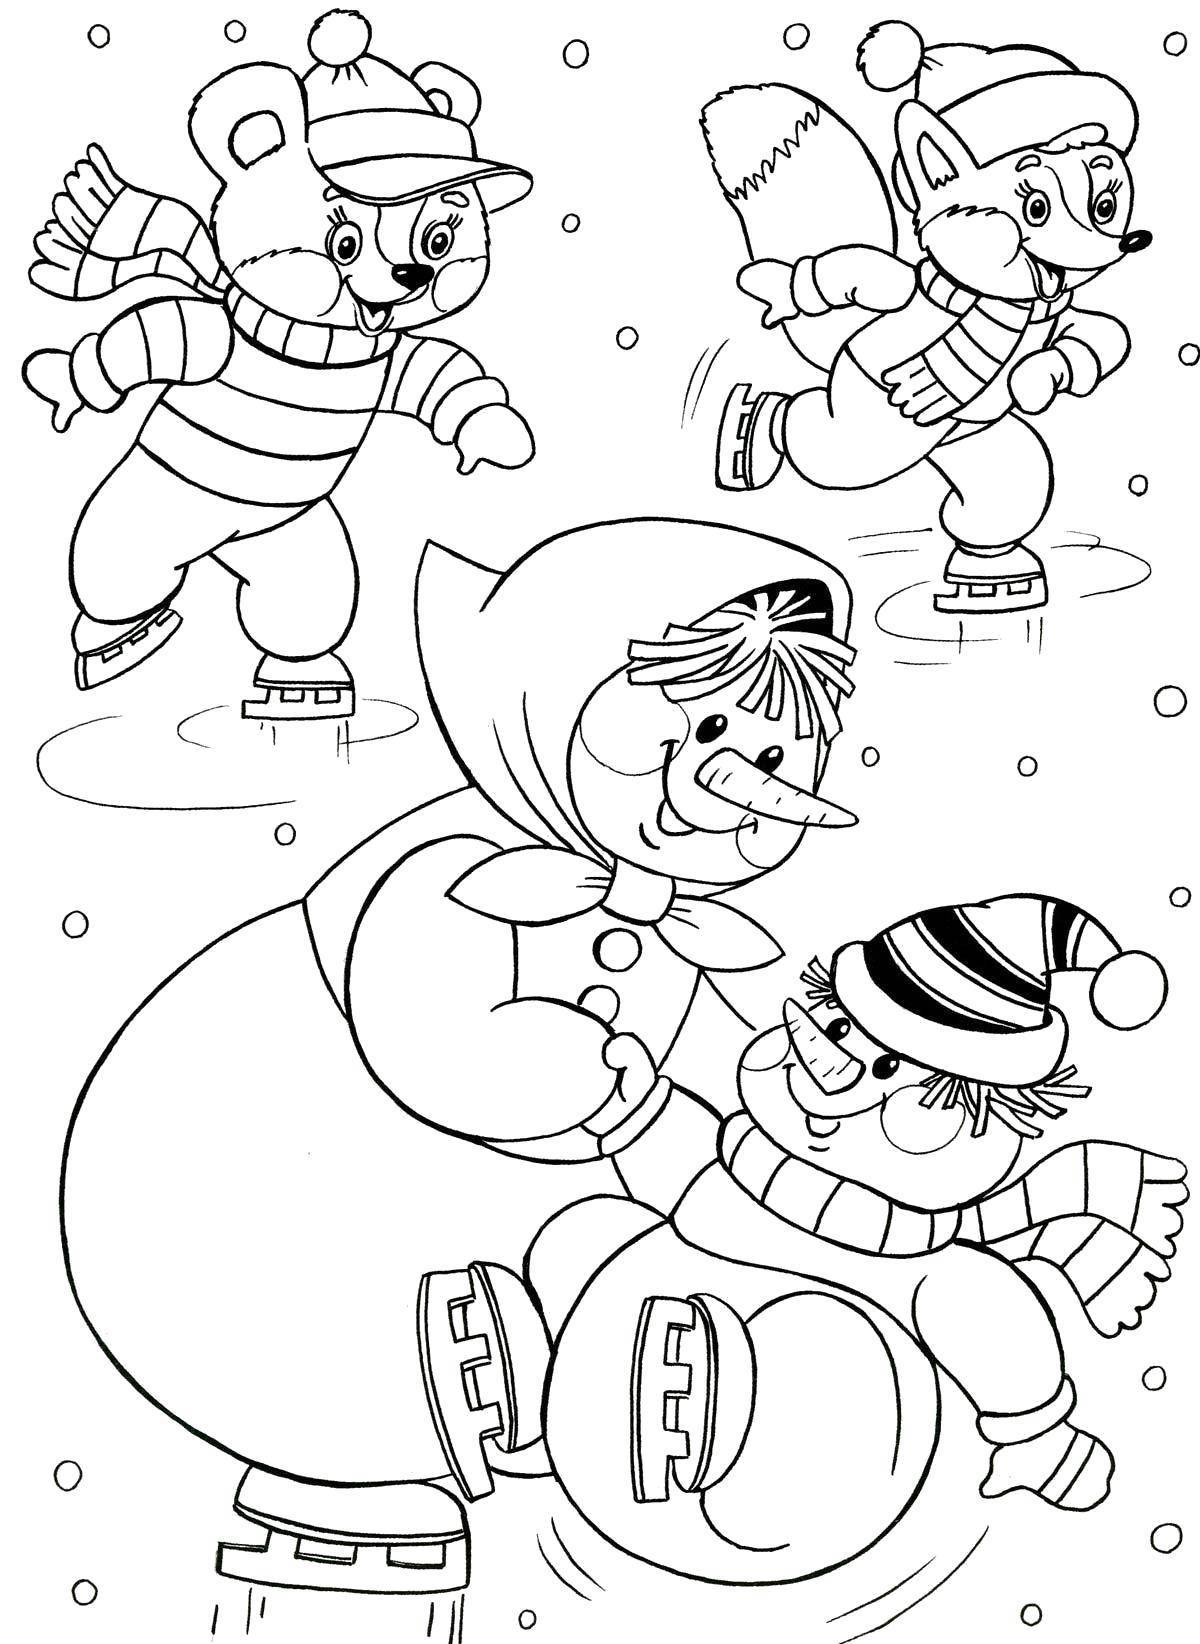 Exciting coloring book for kids winter fun 5-6 years old